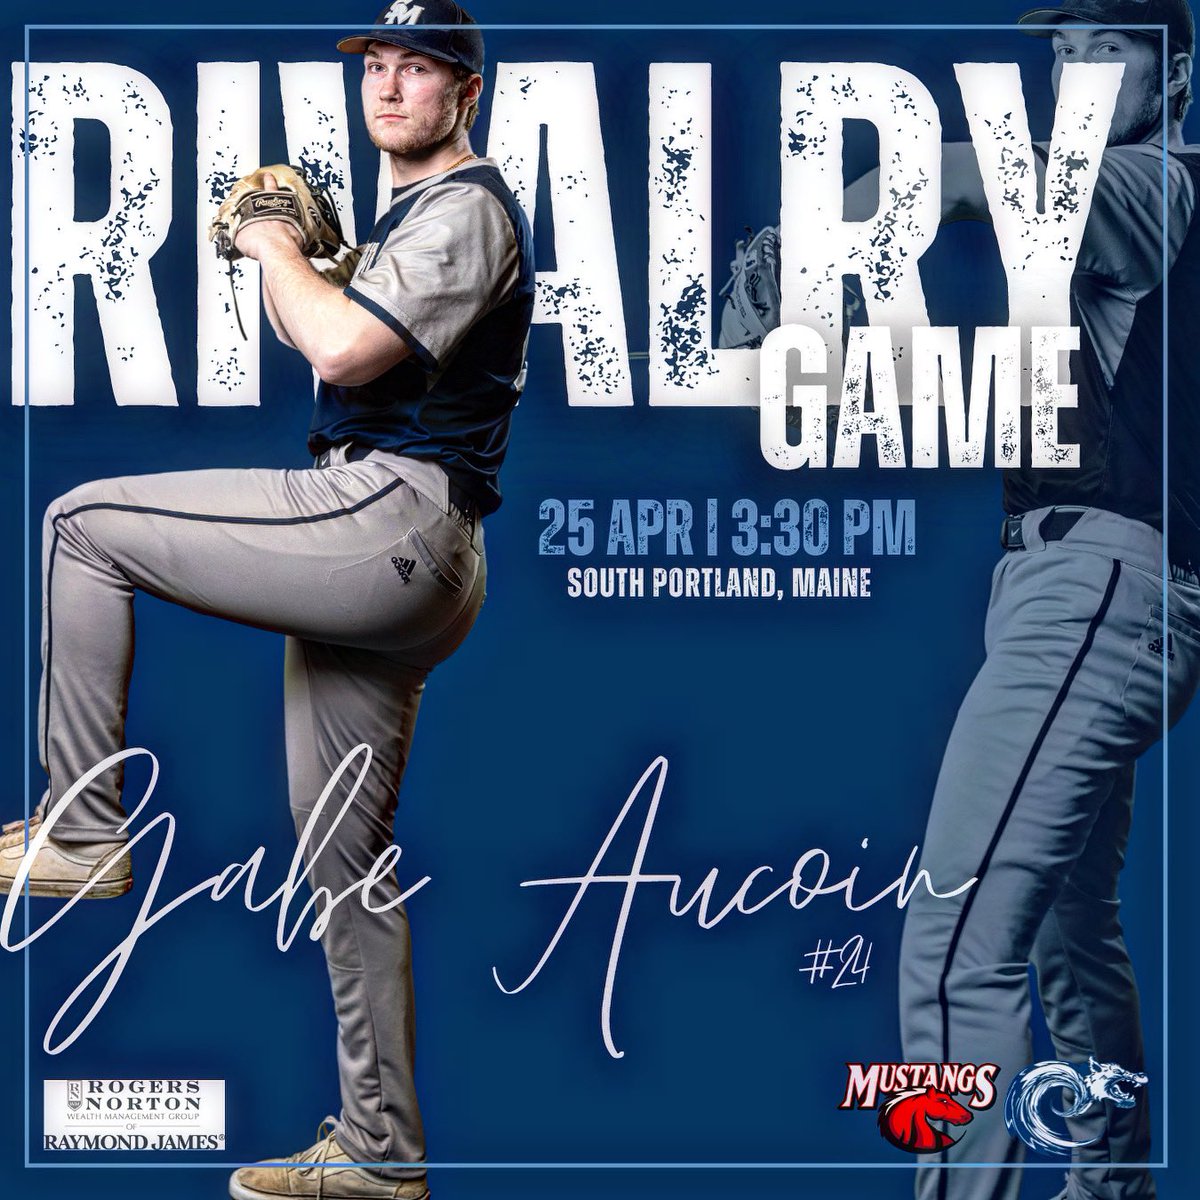 🐺 RIVALRY GAME
➡️ @seawolvesbase 
.
🆚 @CMMustangs 
✅ @YSCC8 
📍 South Portland
⏰ 3:30 pm
📊 web.gc.com/teams/RM3uHr0a…
📺 ysccsportsnetwork.com/southernmainec…

#WeAreSMCC #GoSeawolves @USCAA @smccmaine @MaineSportsComm @MCCSme